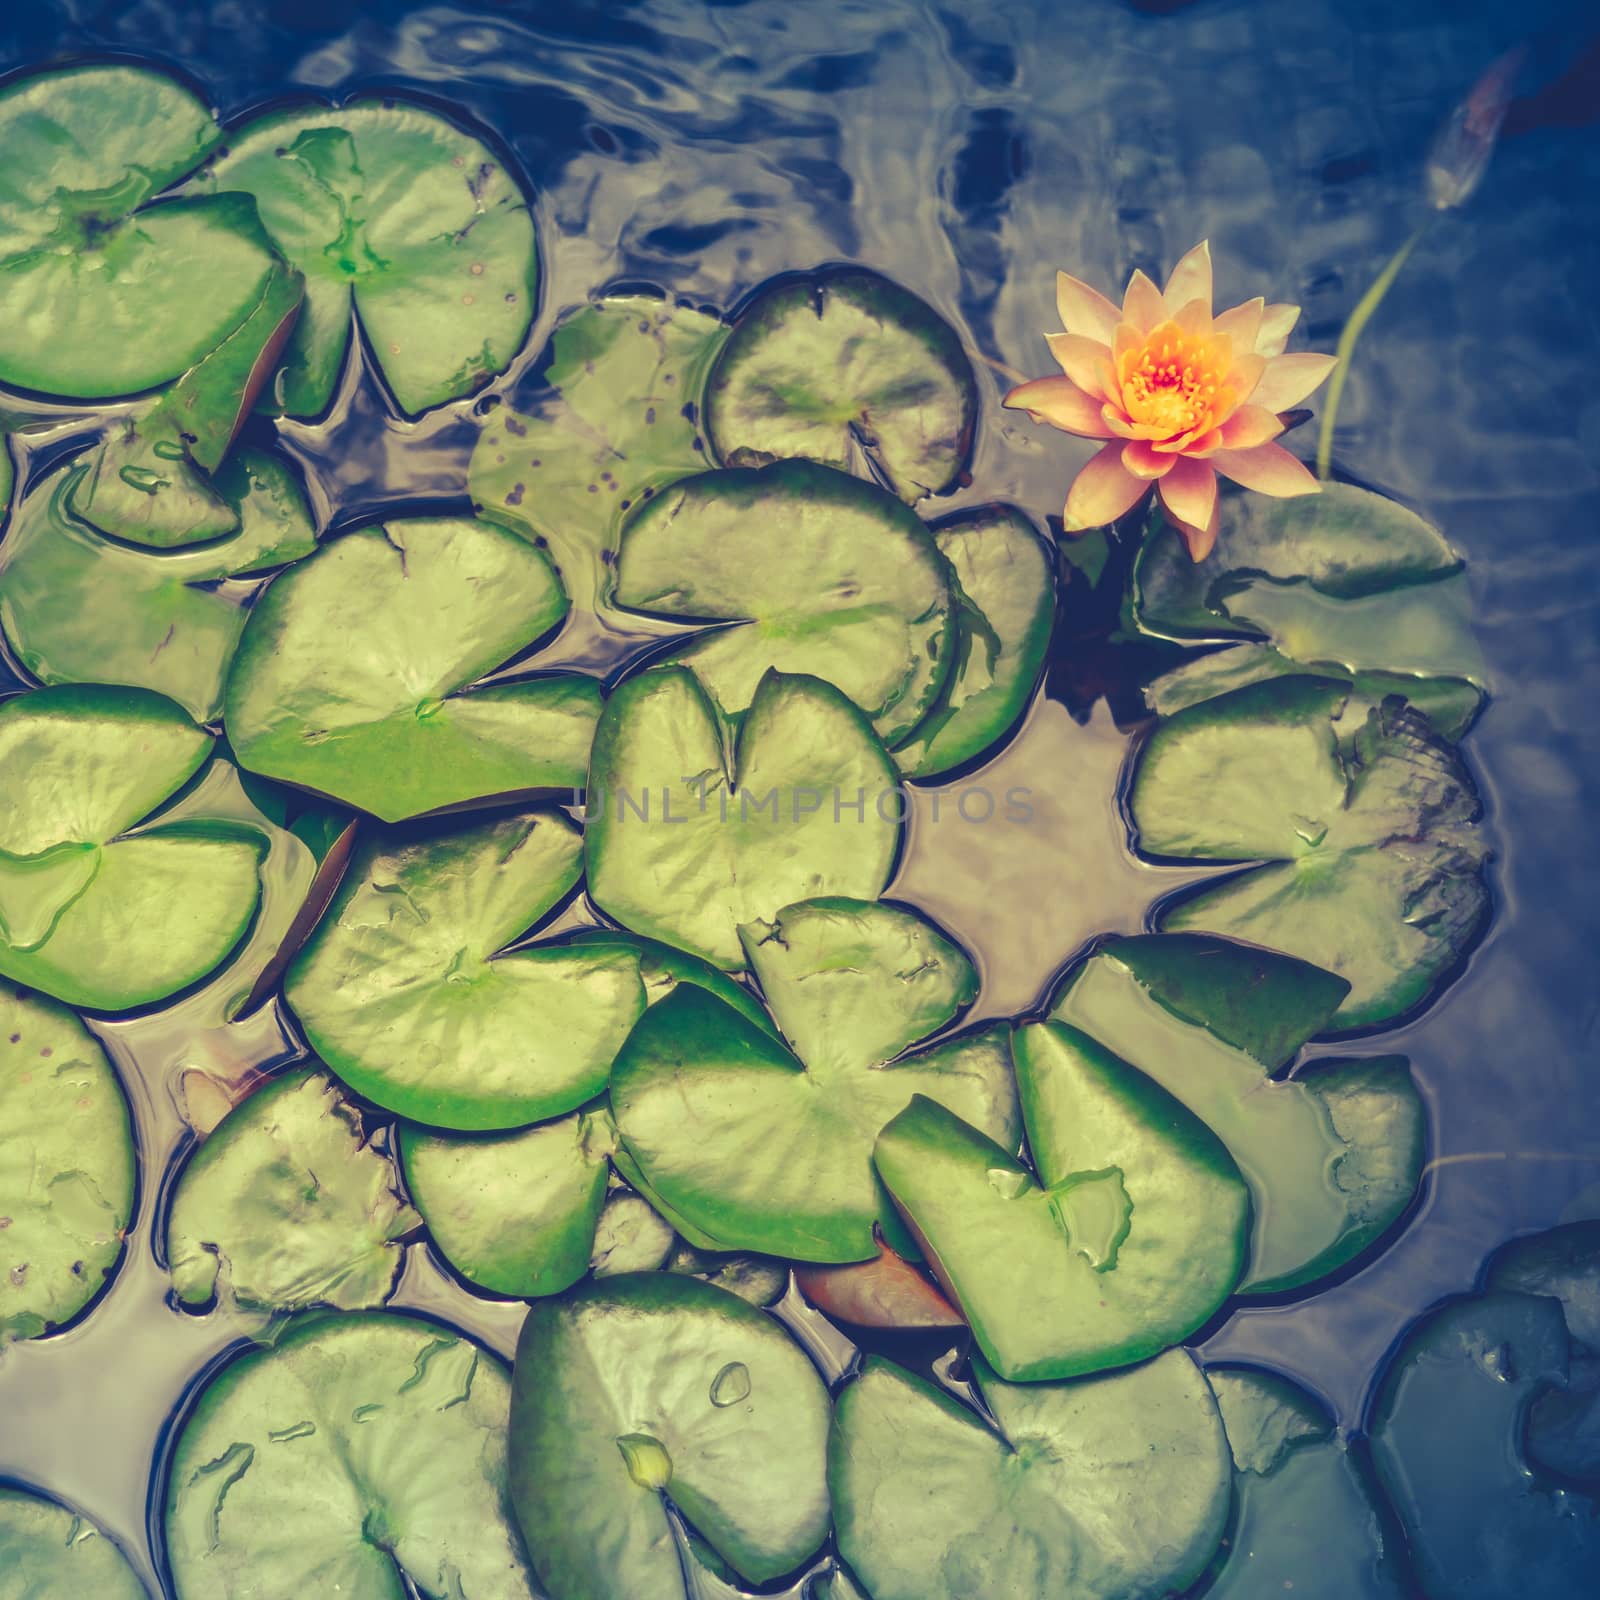 Retro Filter Photo Of Water Lily Pads In A Pond In Hawaii